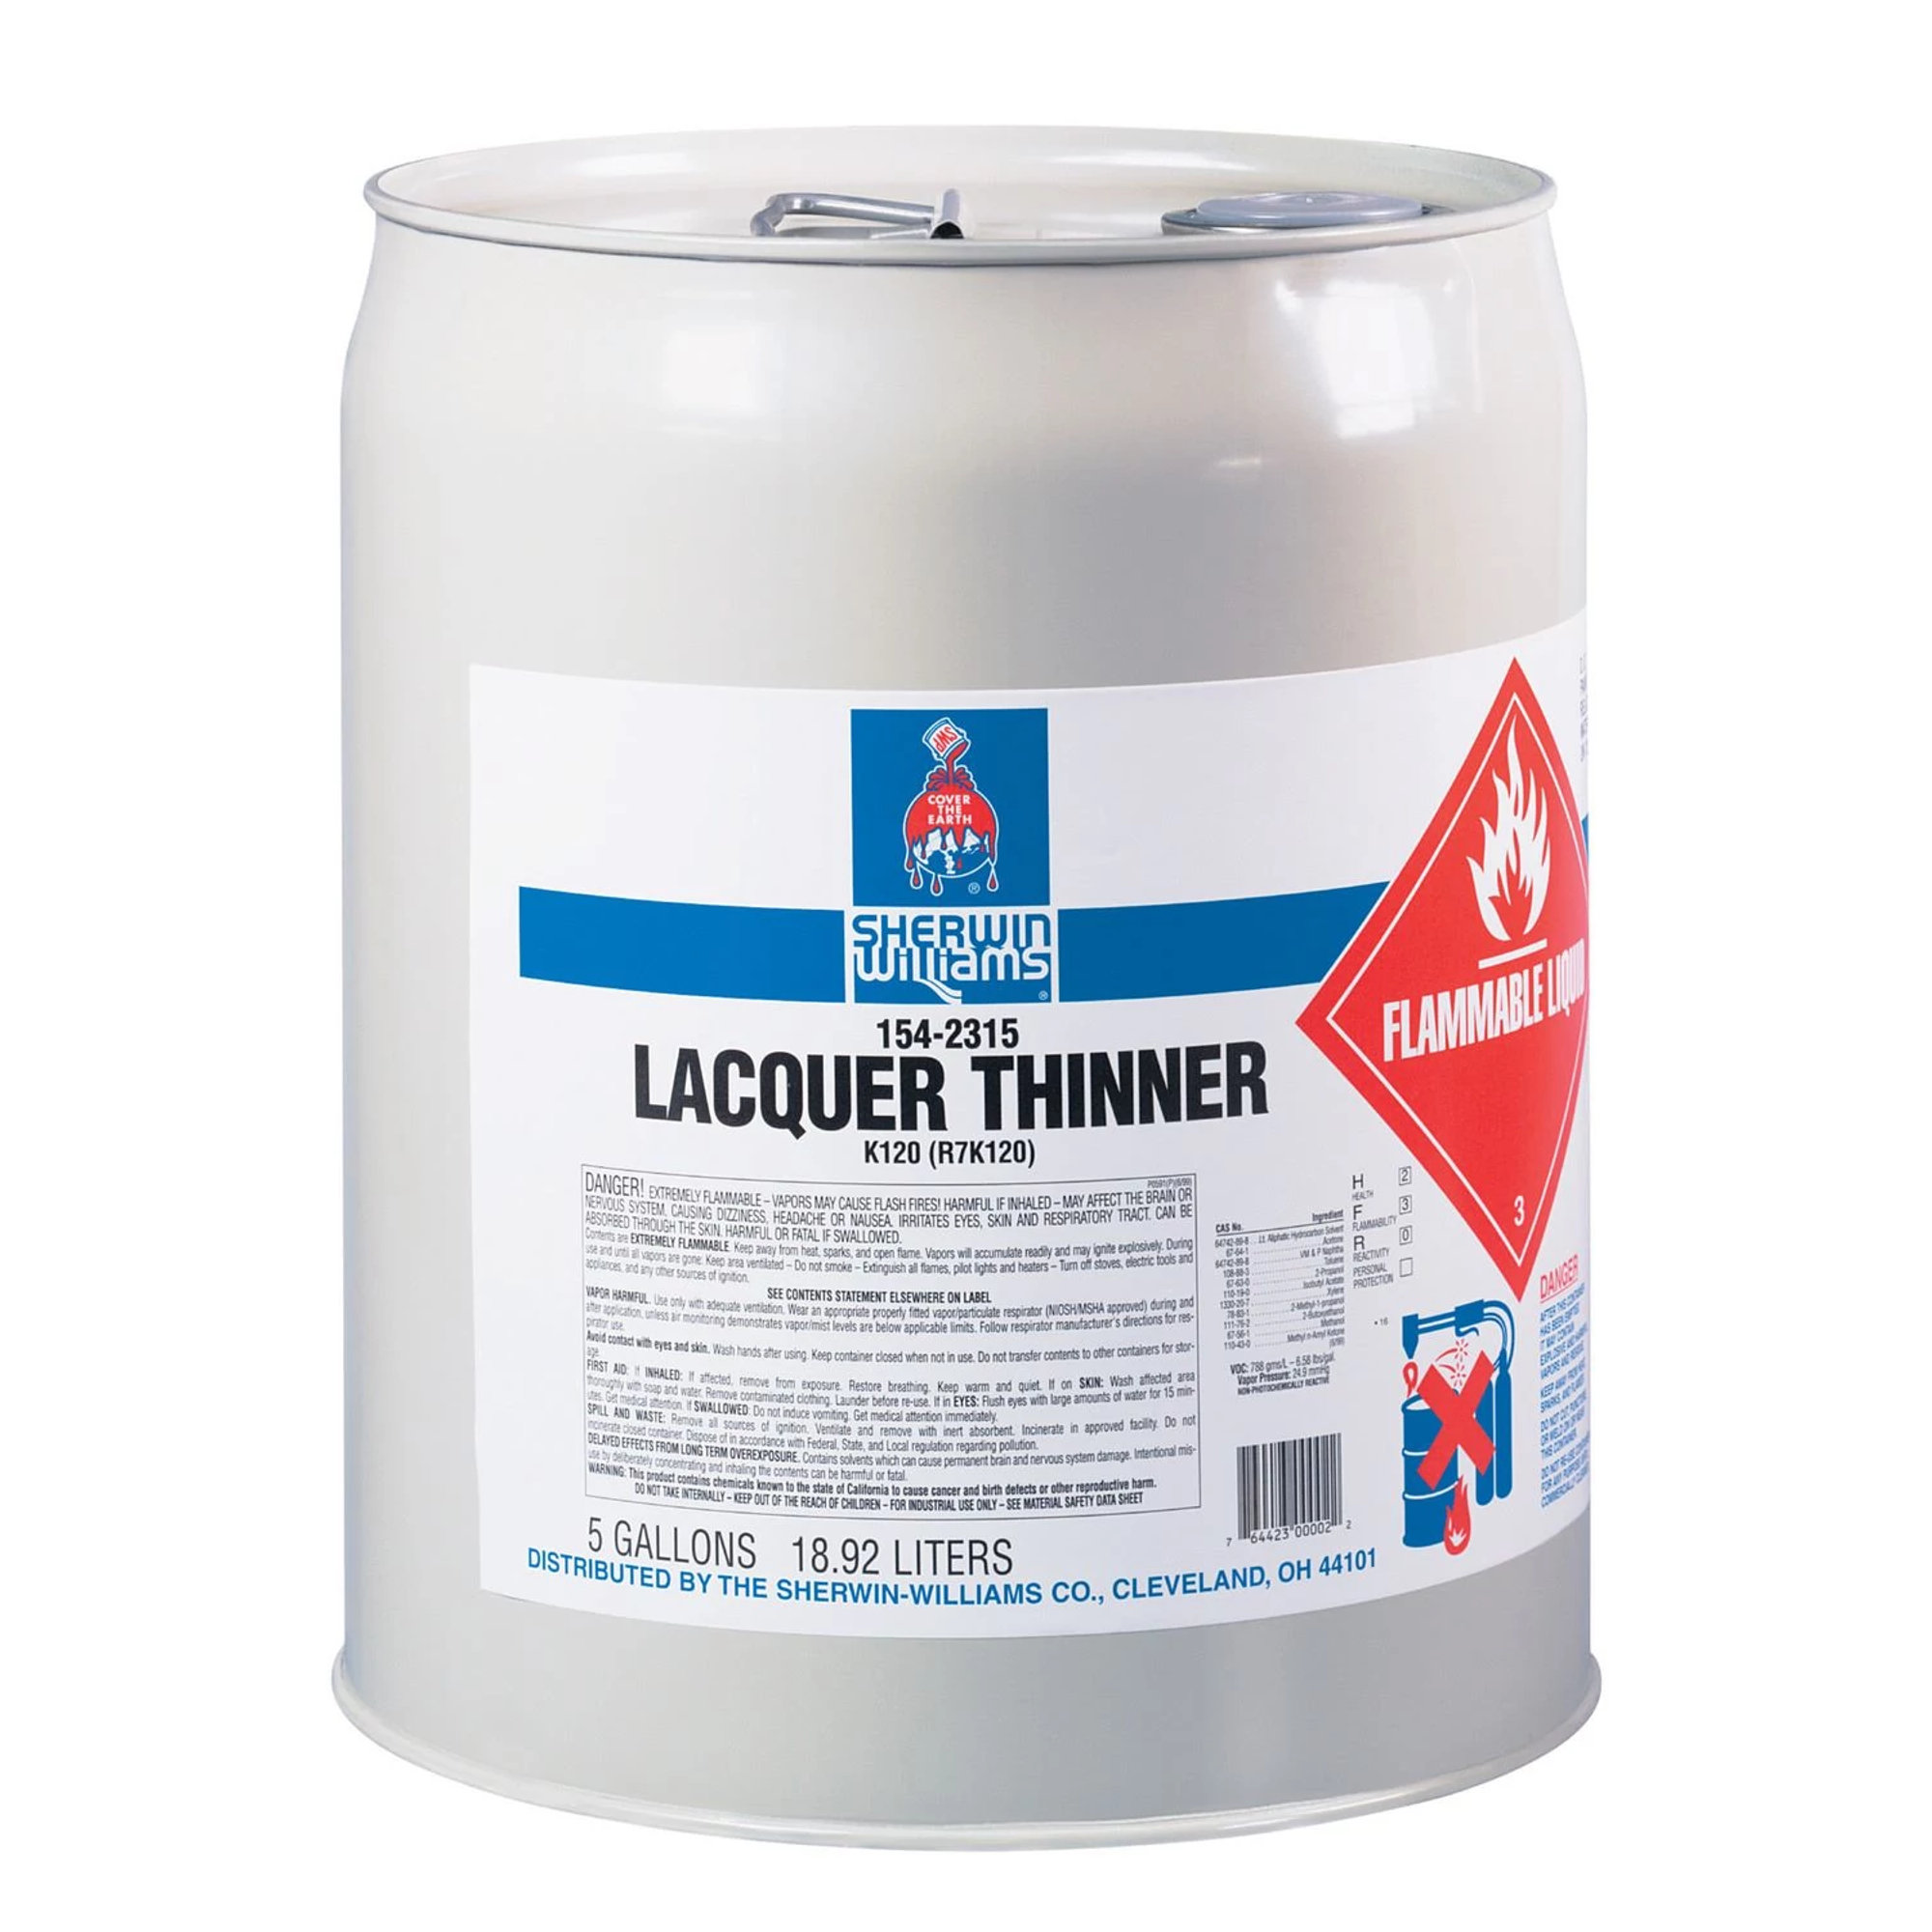 Stinger Lacquer Thinner – Patriot Distributing